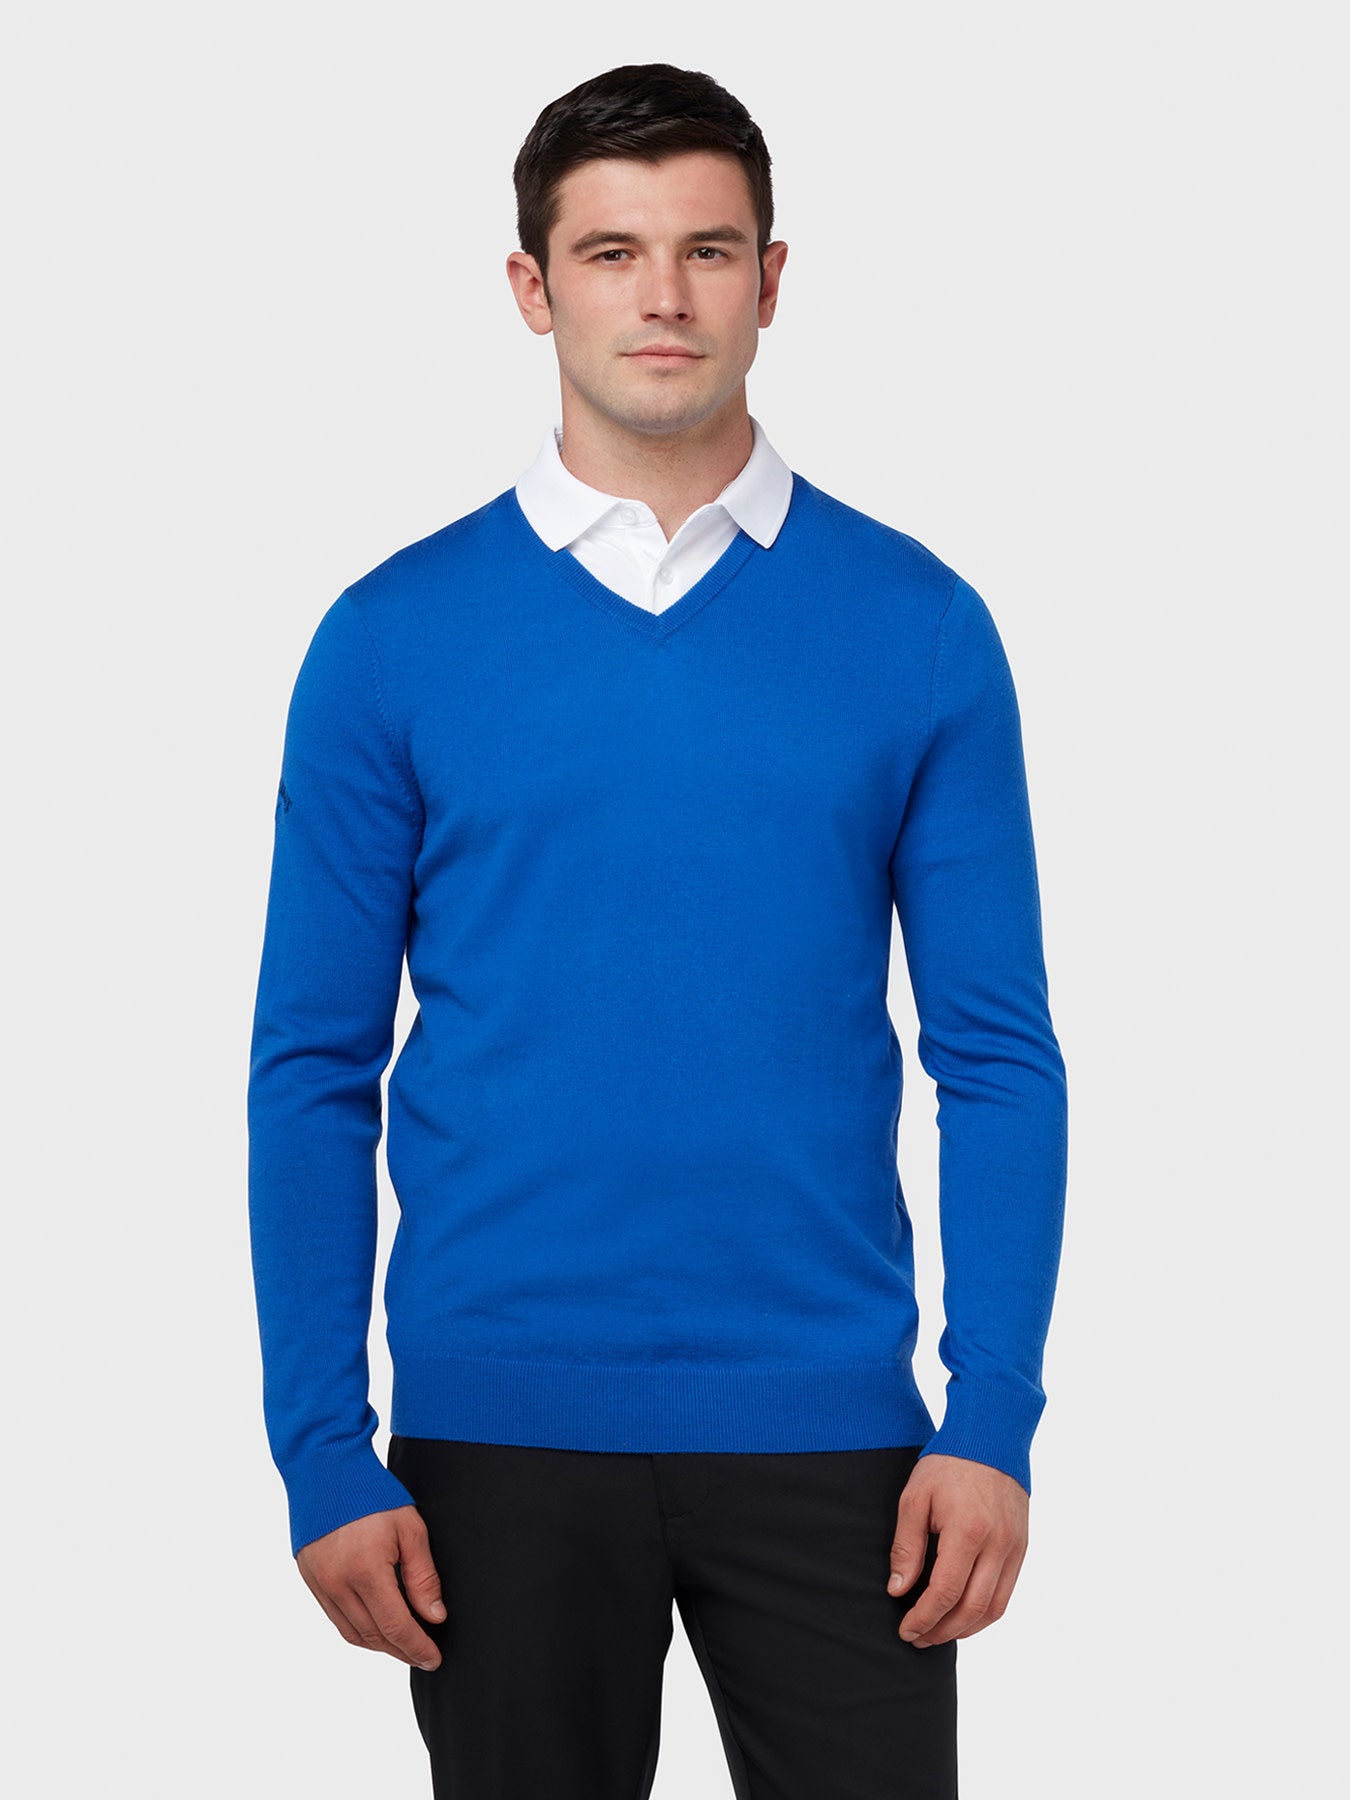 View Thermal Merino Wool VNeck Sweater In Surfing Blue Surfing Blue L information